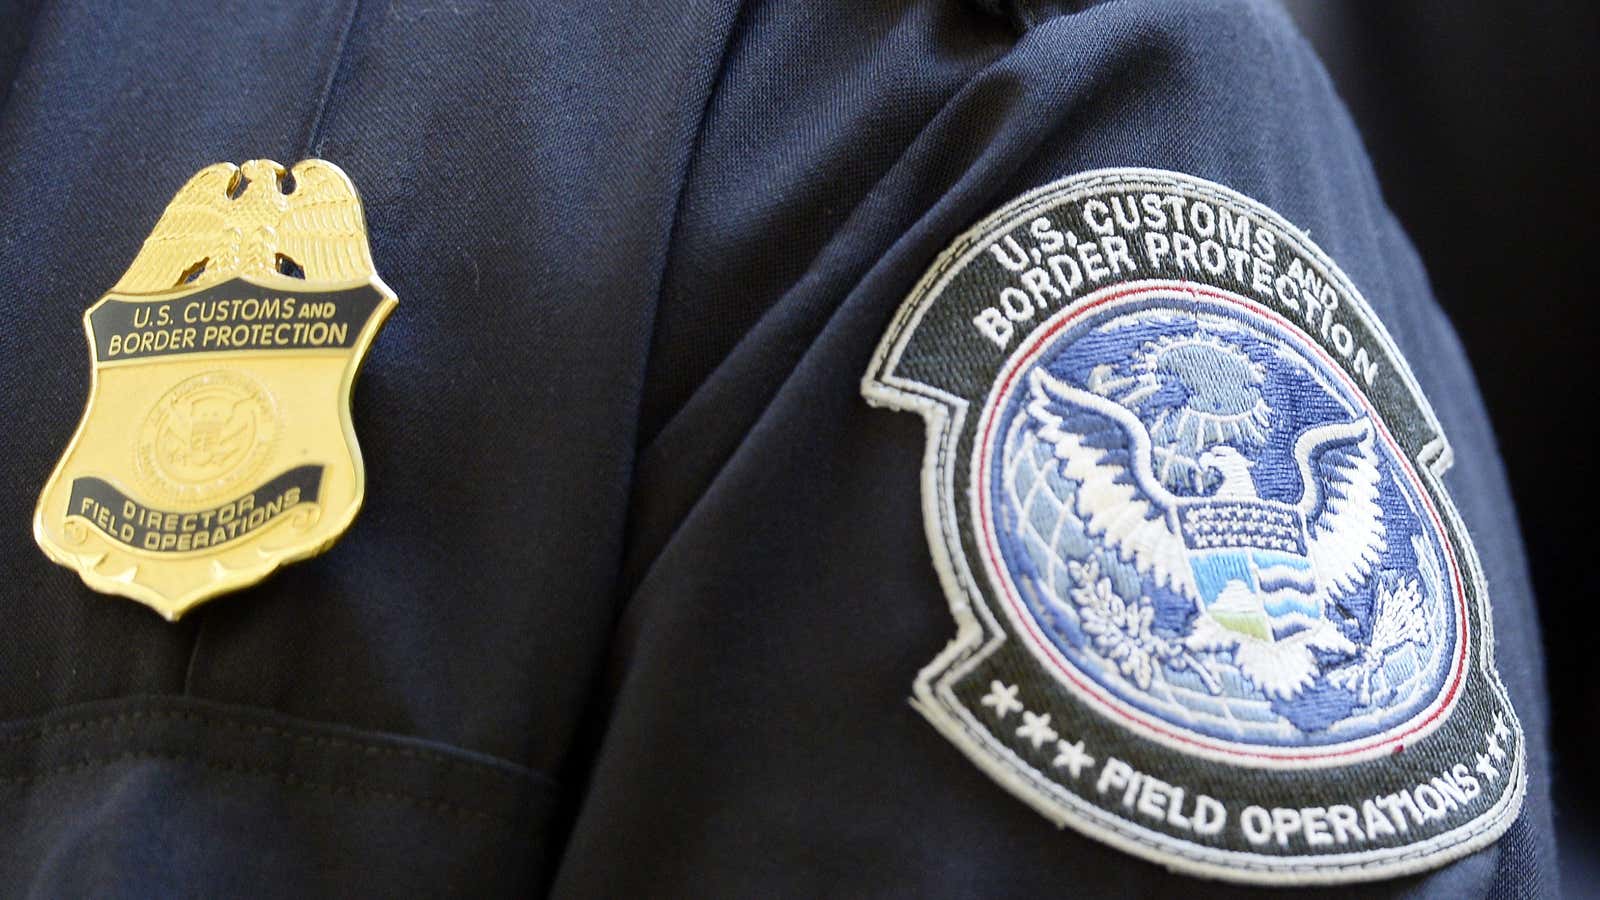 More and more US Customs and Border Protection officers are struggling with depression.